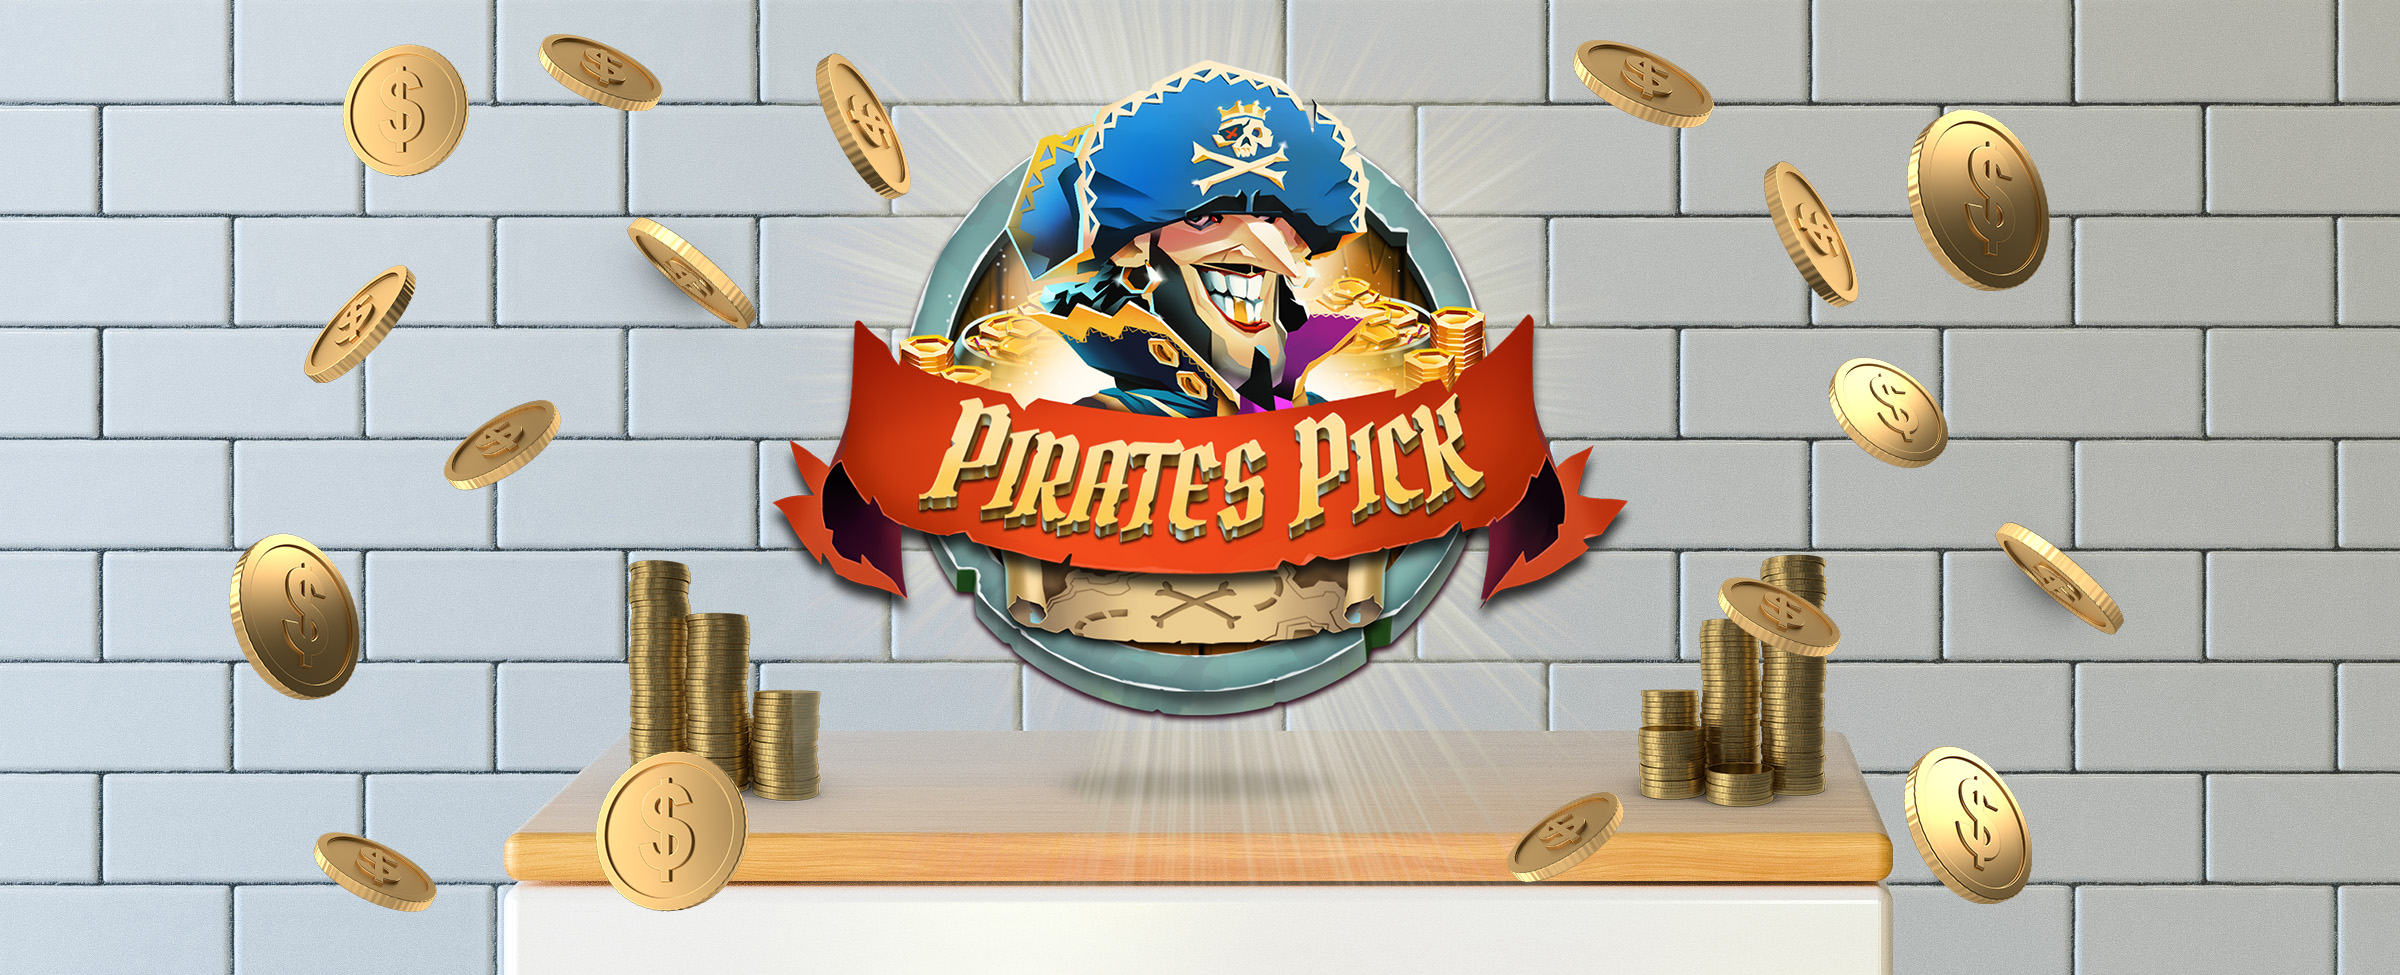 A Cafe Casino slot game logo, titled Pirate’s Pick, hovers above a timber kitchen cabinet, flanked by stacks of coins, surrounded by floating oversized coins. The background is a crisp, white subway-tiled wall.